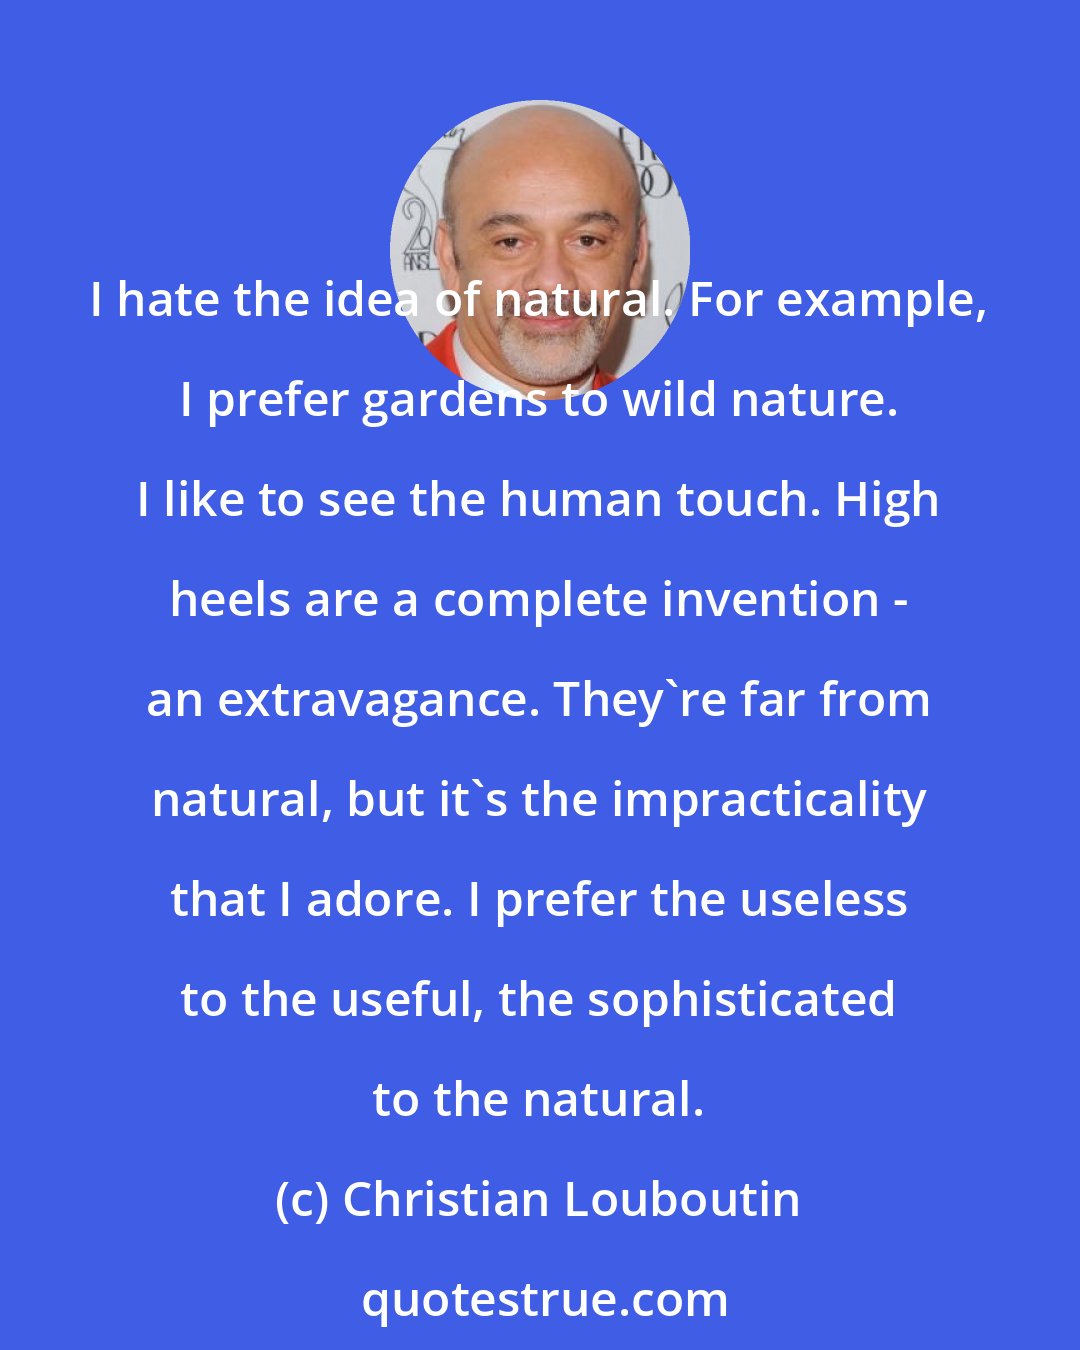 Christian Louboutin: I hate the idea of natural. For example, I prefer gardens to wild nature. I like to see the human touch. High heels are a complete invention - an extravagance. They're far from natural, but it's the impracticality that I adore. I prefer the useless to the useful, the sophisticated to the natural.